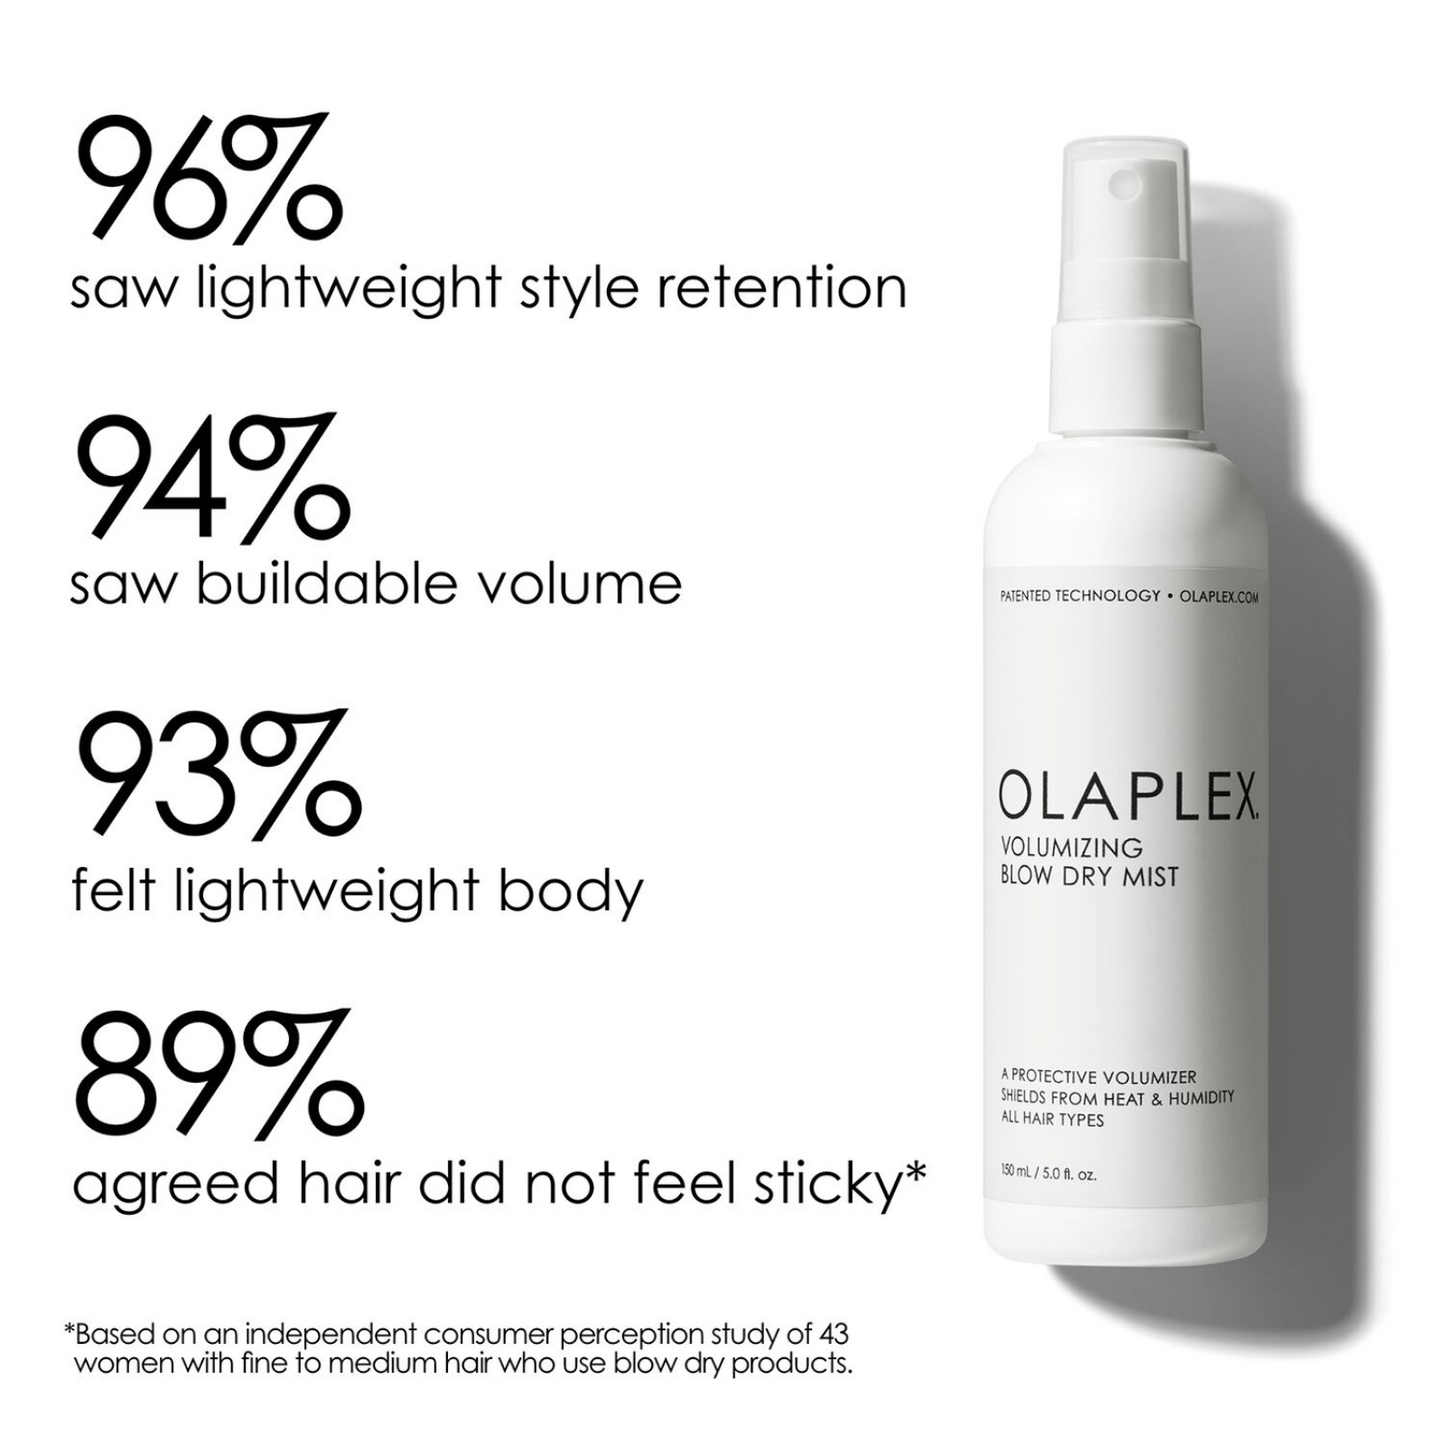 Repairs and protects hair for faster, healthier-looking blowouts. Lasting body and bounce. Creates touchably soft, shiny hair. 96% saw lightweight style retention. 94% saw buildable volume. 93% felt lightweight body. 89% agreed hair did not feel sticky.*